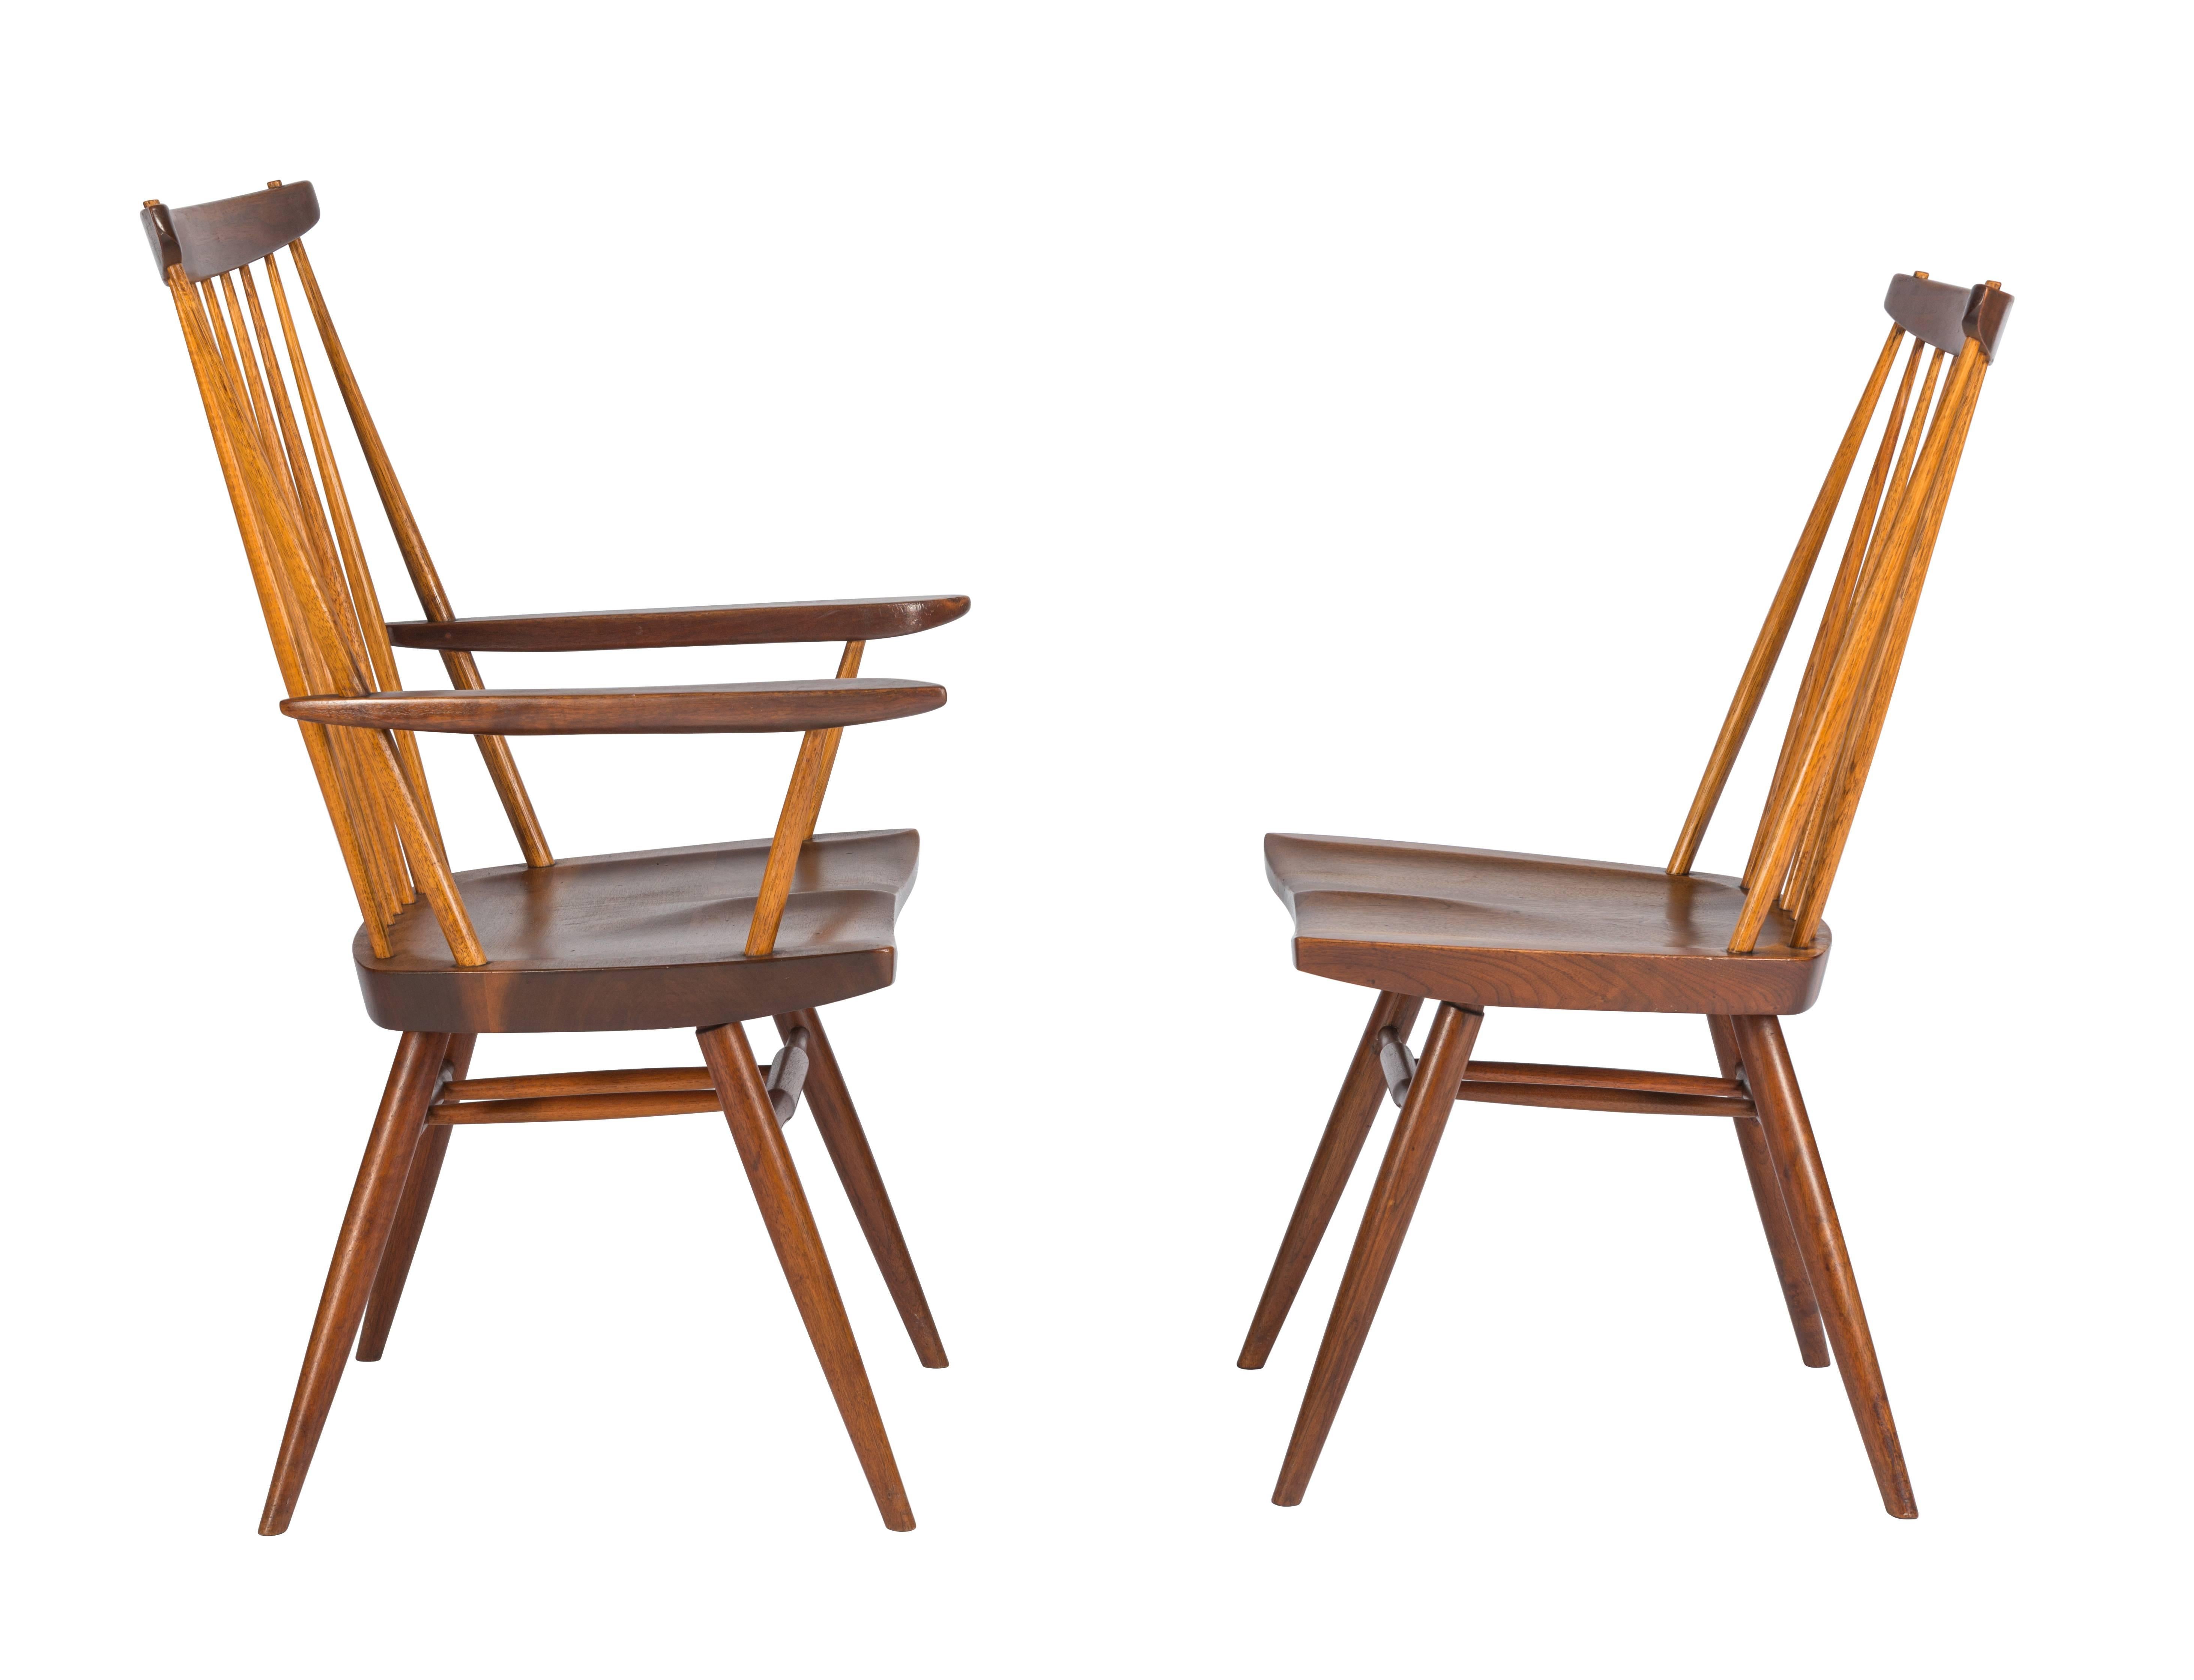 Nice set of Nakashima "New" chairs in walnut. One armchair and five side chairs. Set comes with complete provenance.